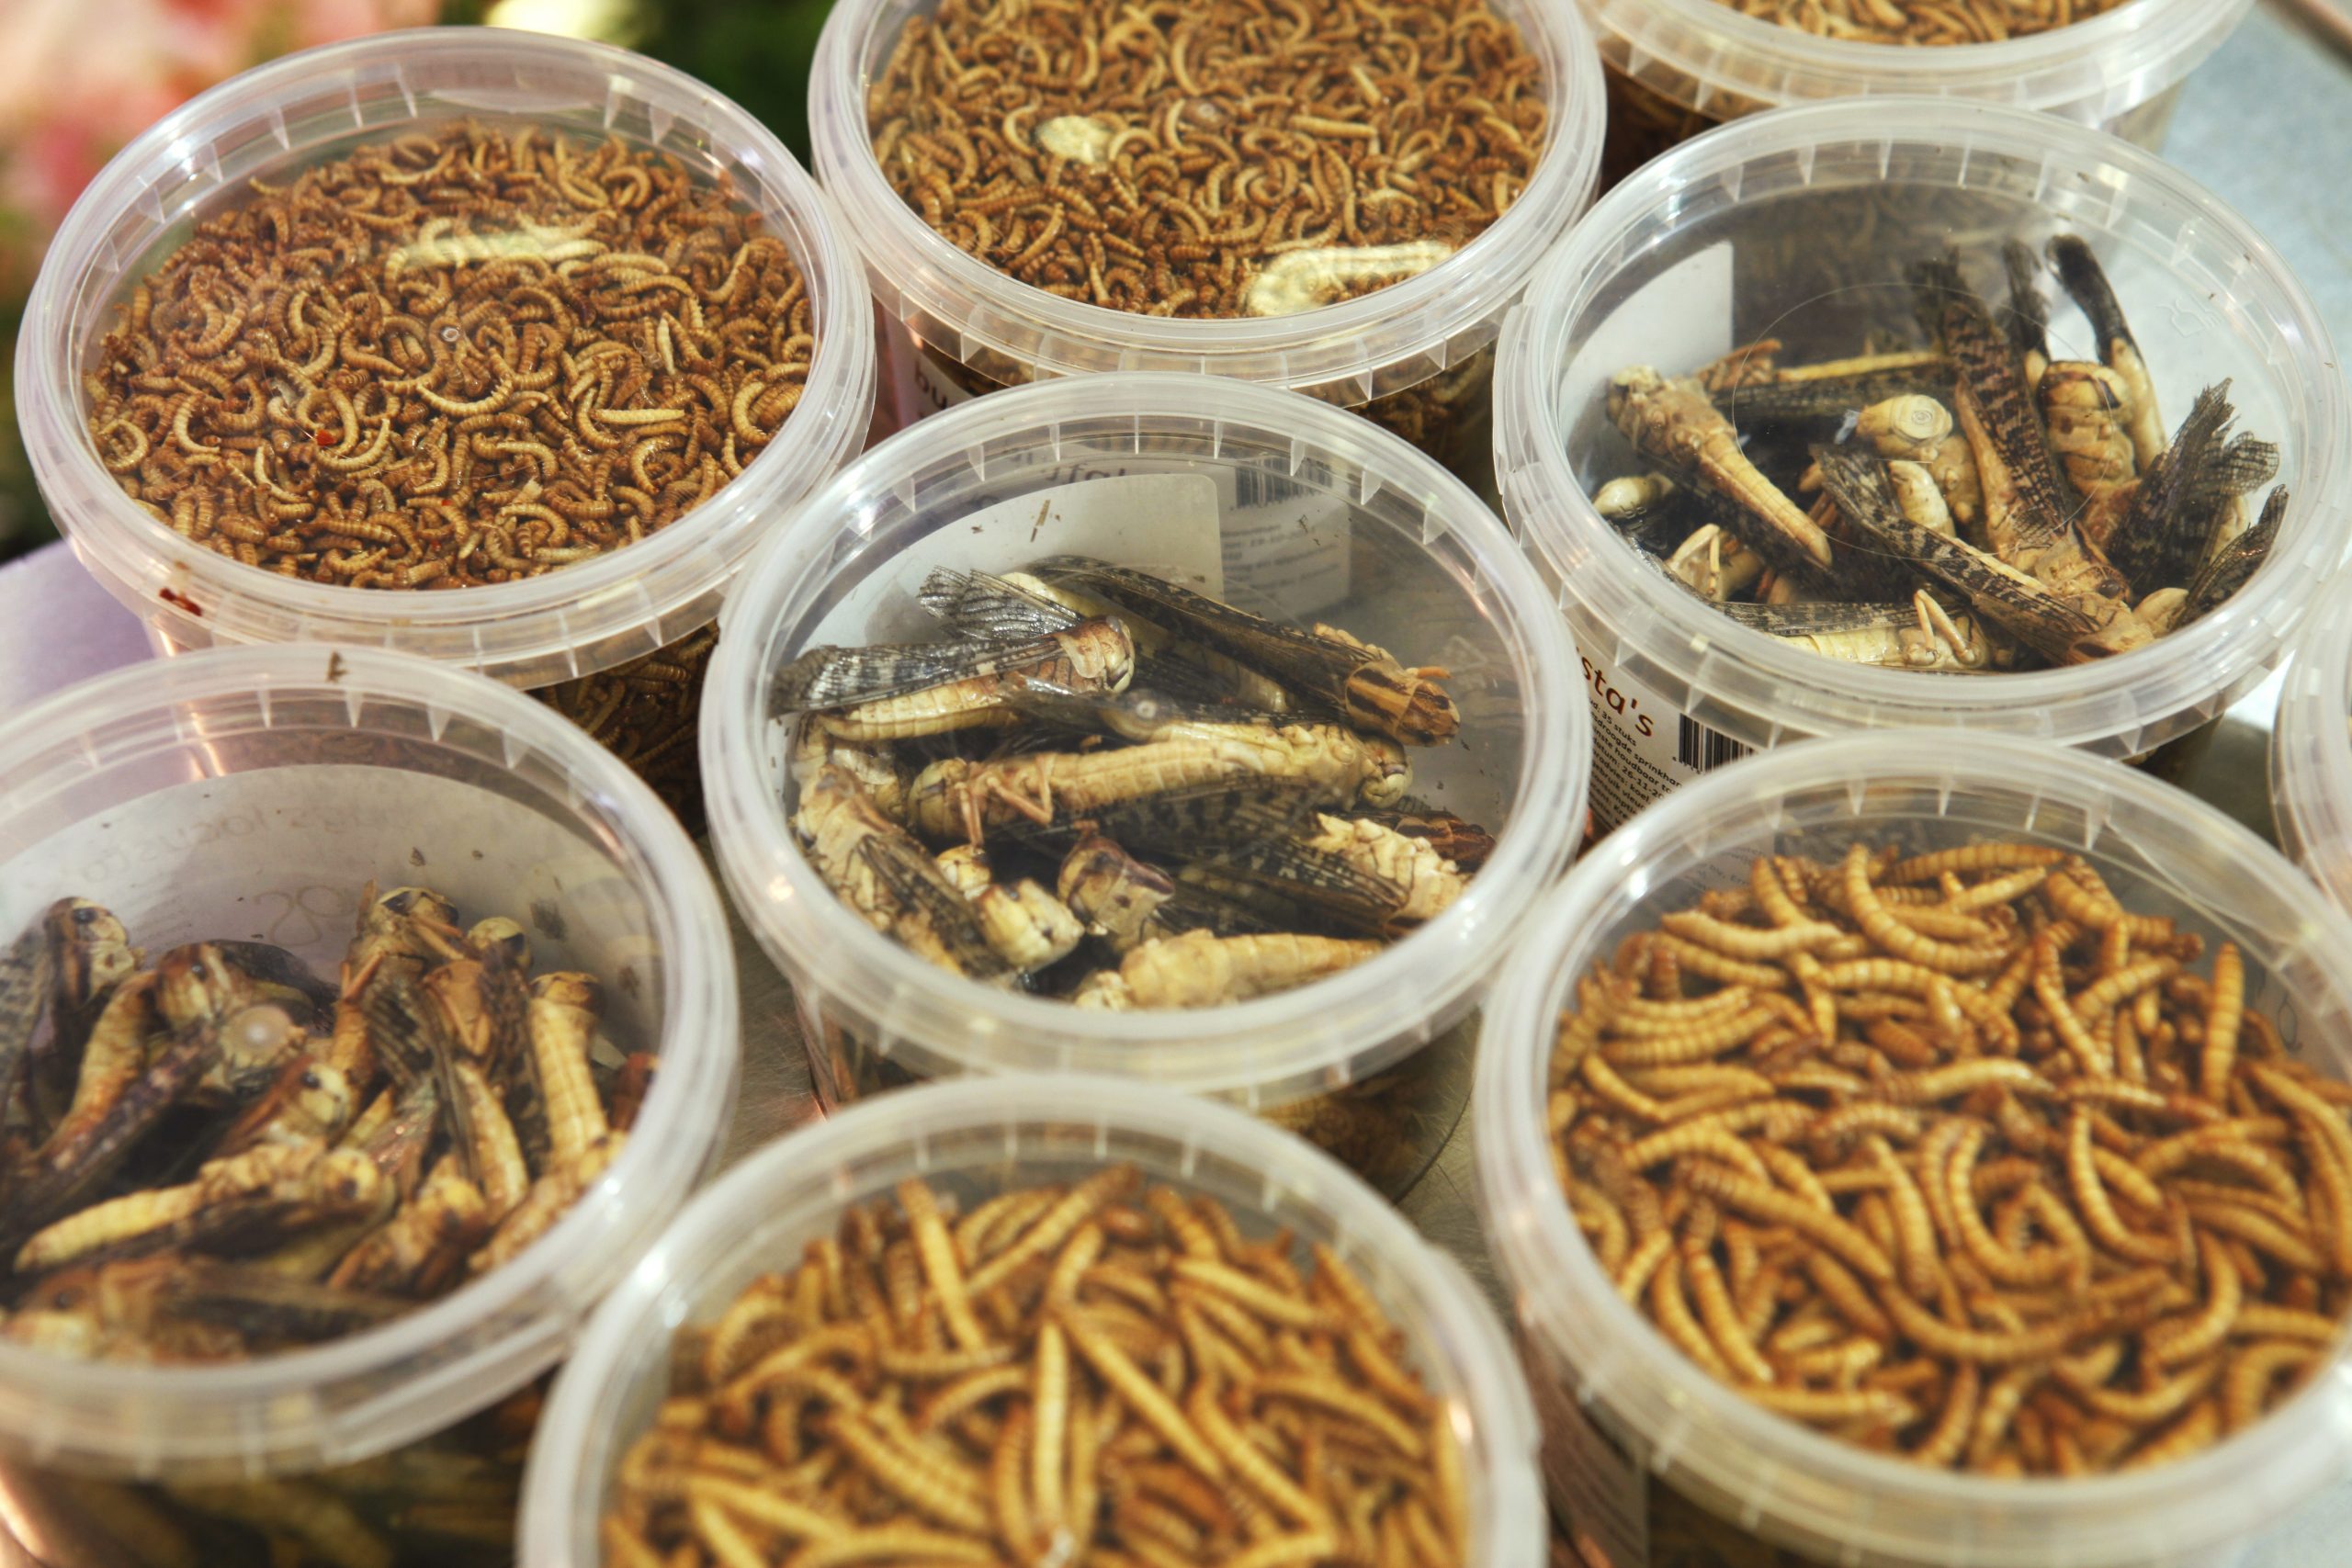 Danes to start large-scale production mealworms. Photo: Jan Willem Schouten